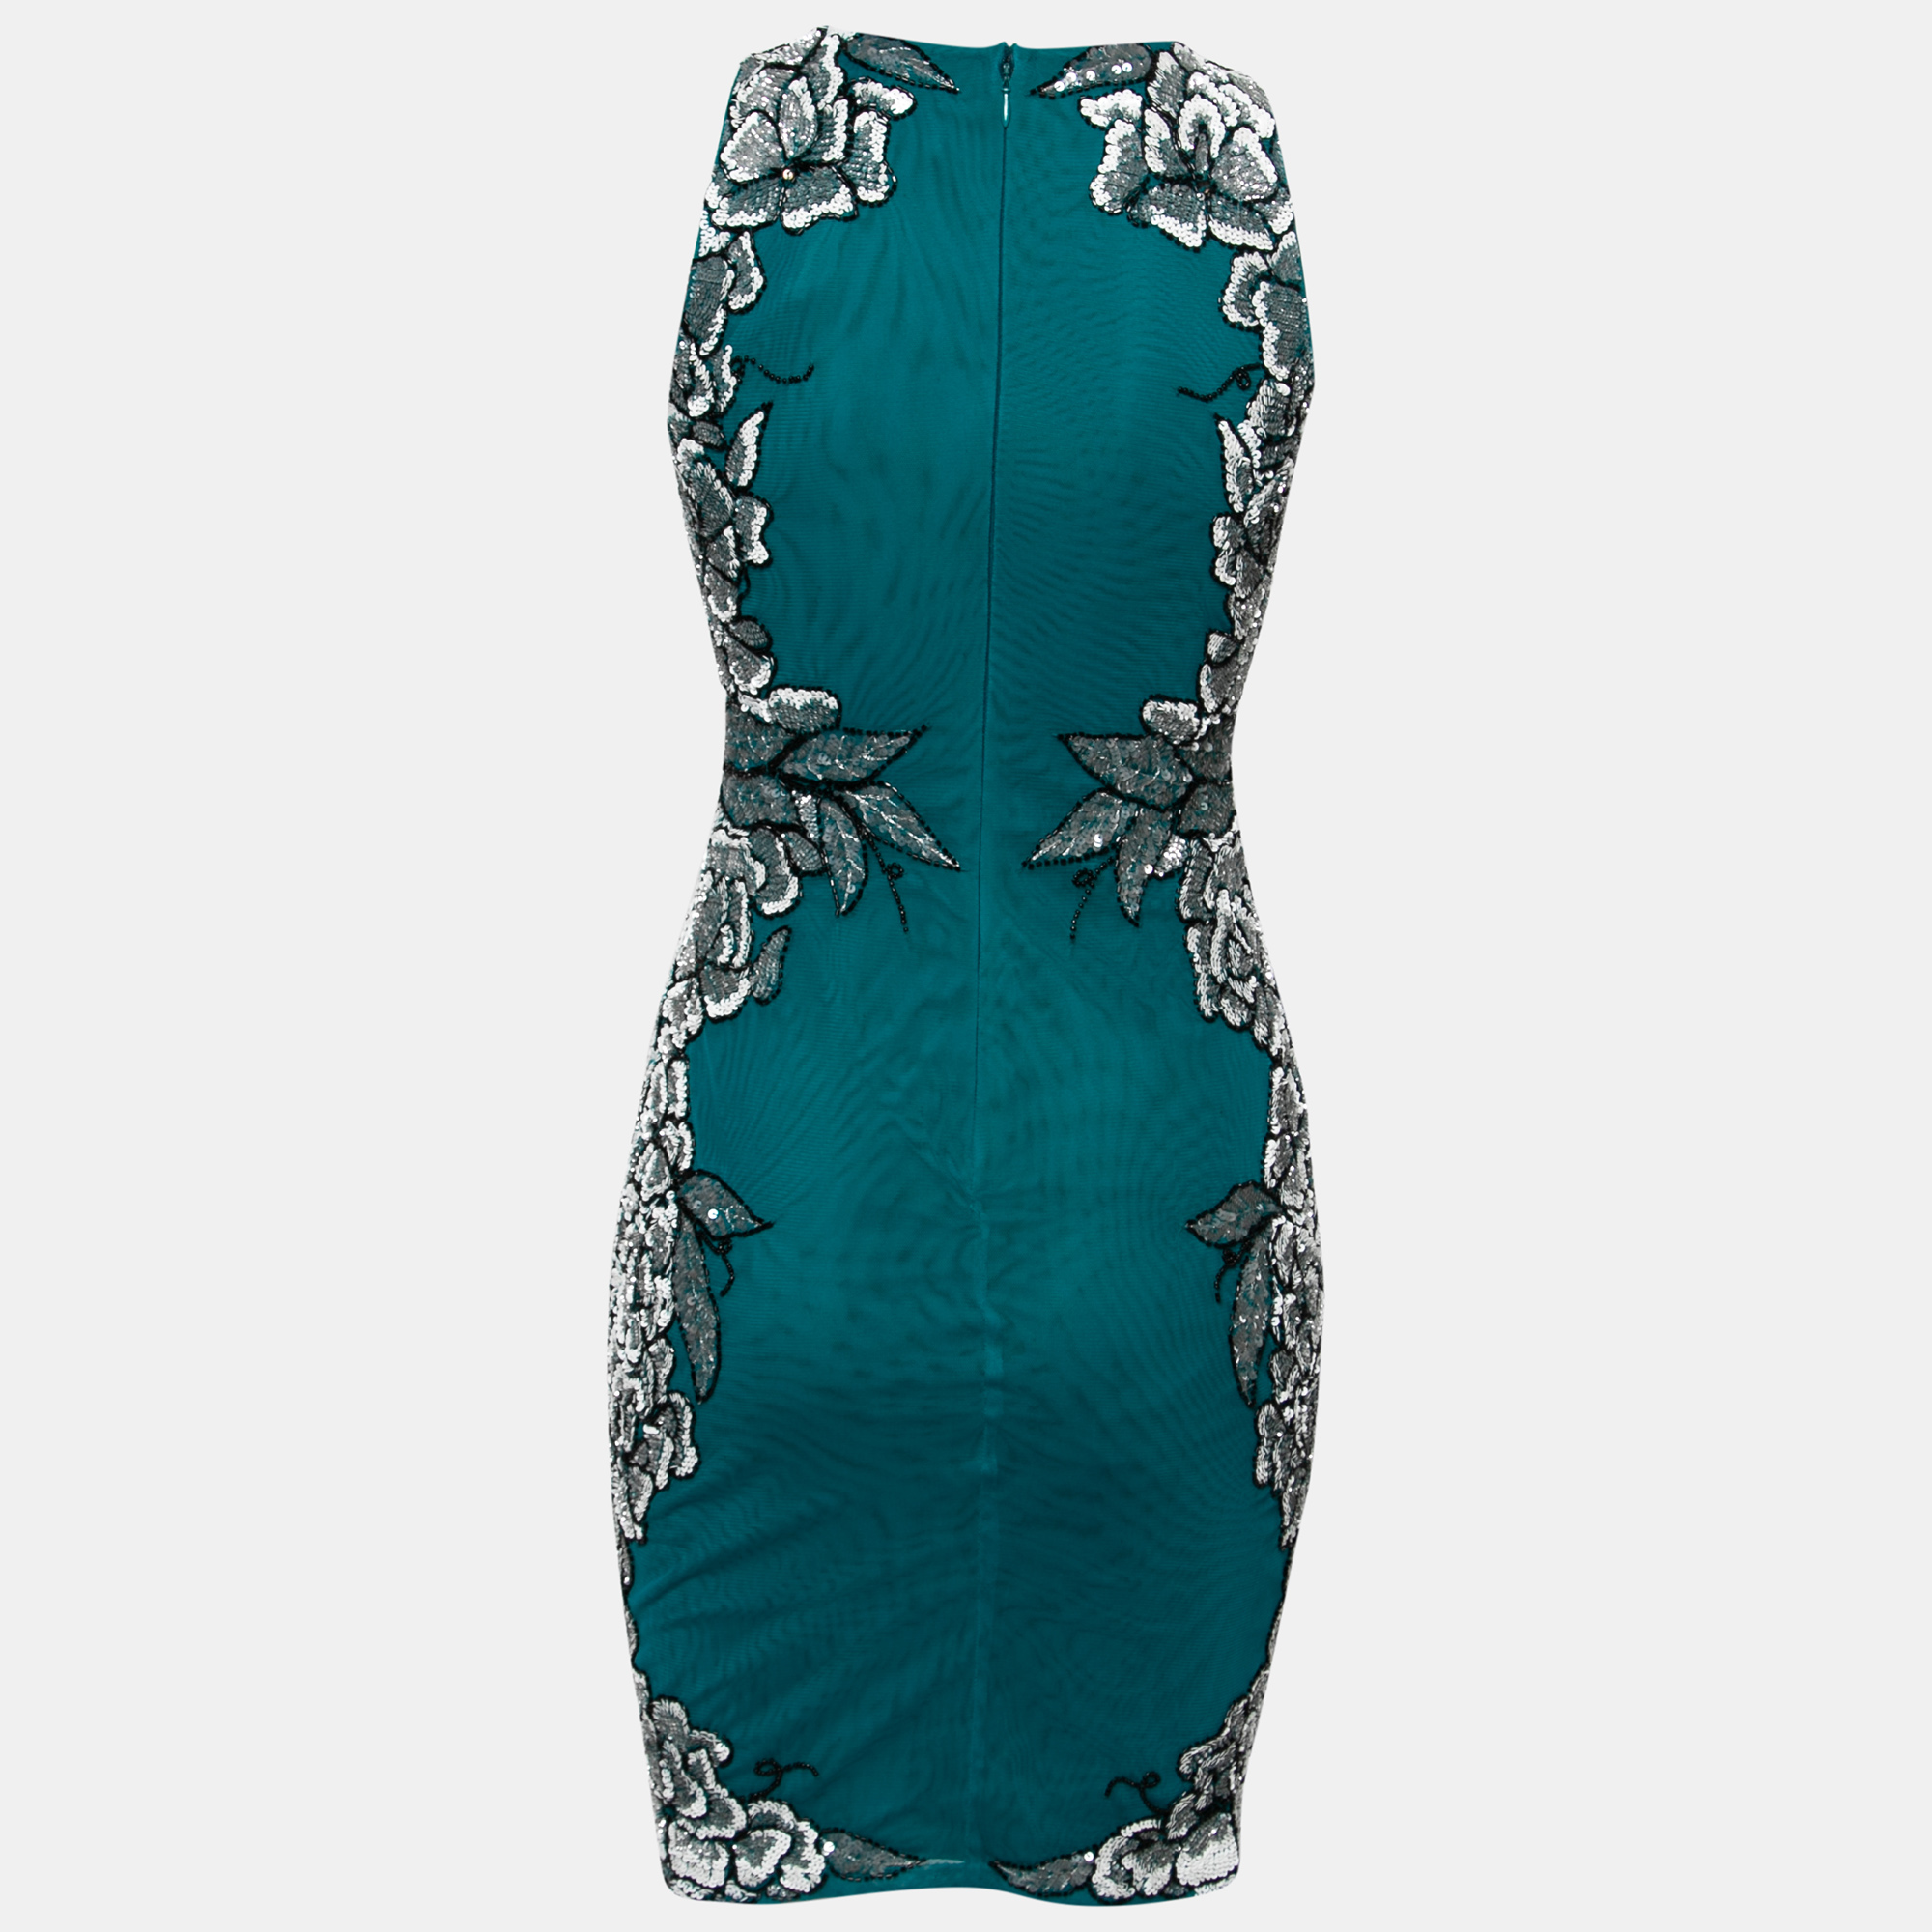 

Badgley Mischka Collection Teal Green Floral Sequin Embellished Sleeveless Cocktail Dress